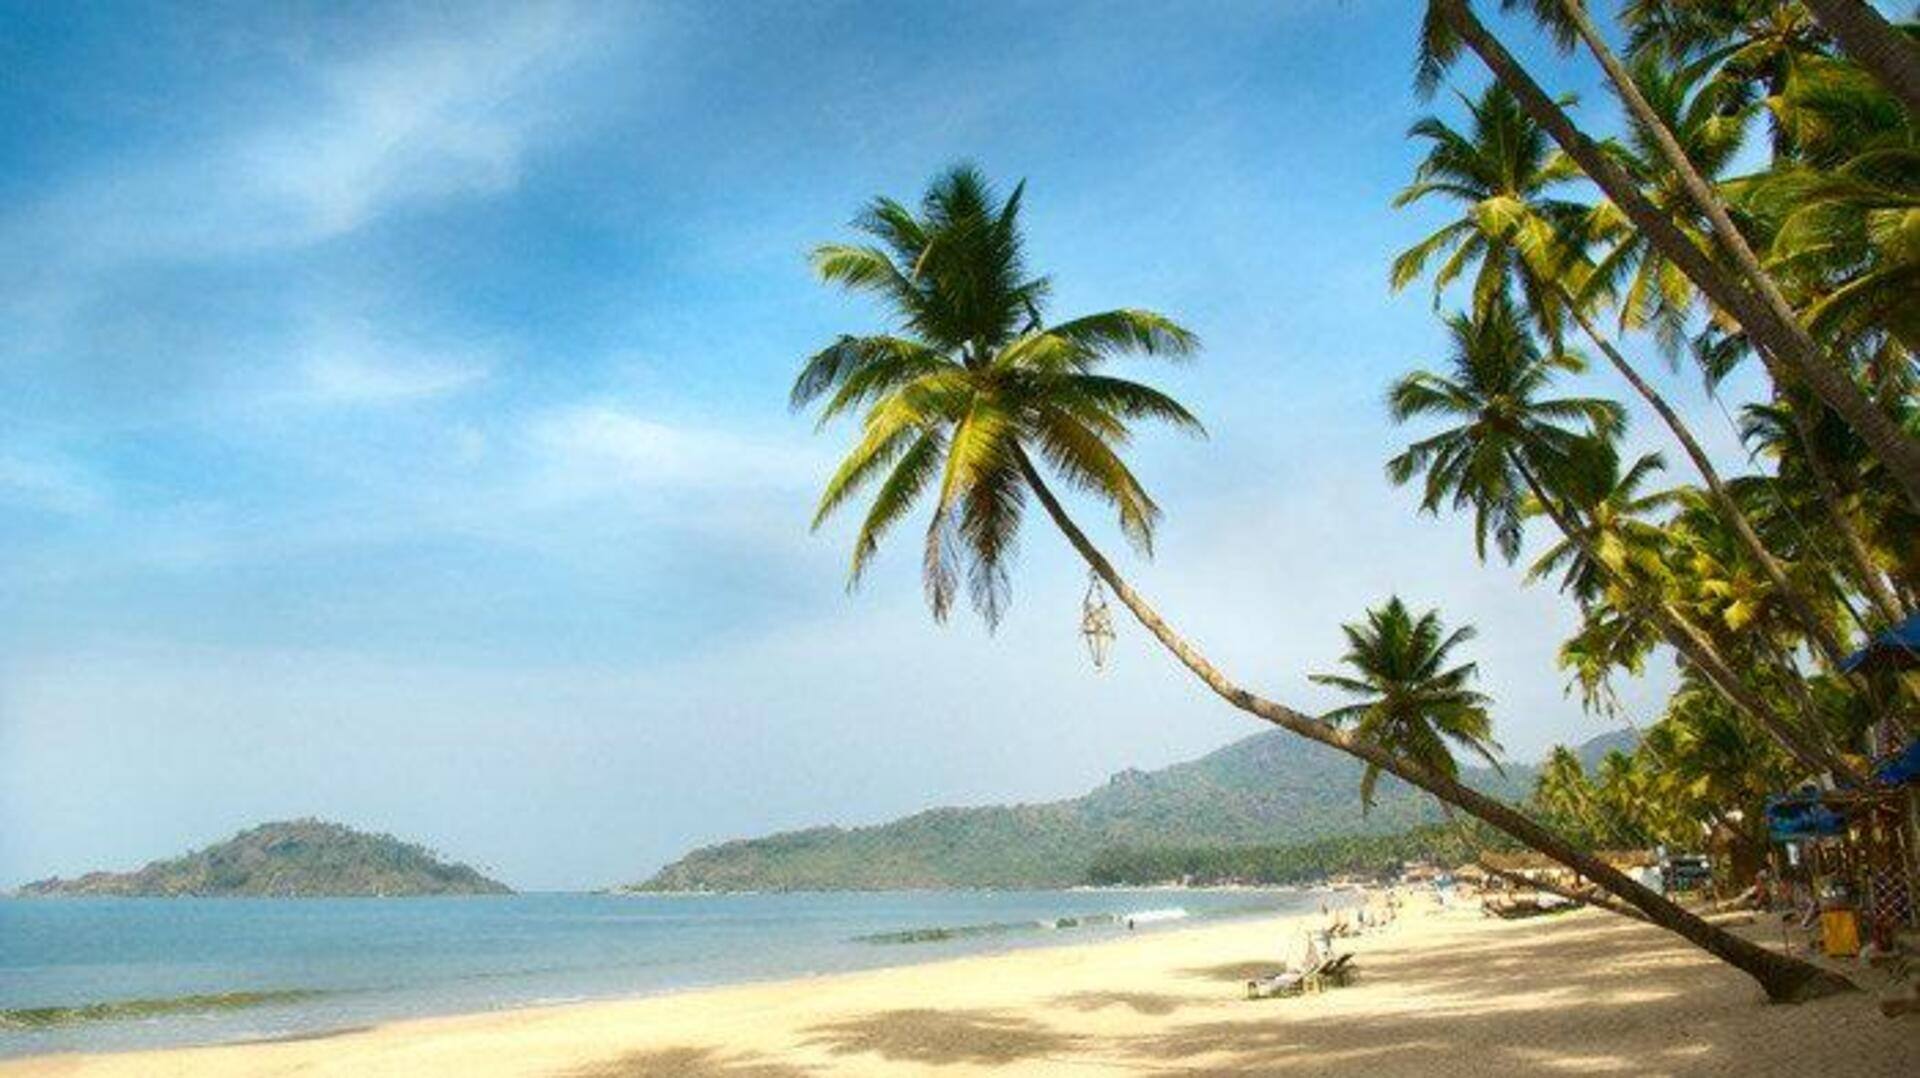 Goa luxury hotel manager arrested for drowning wife on beach